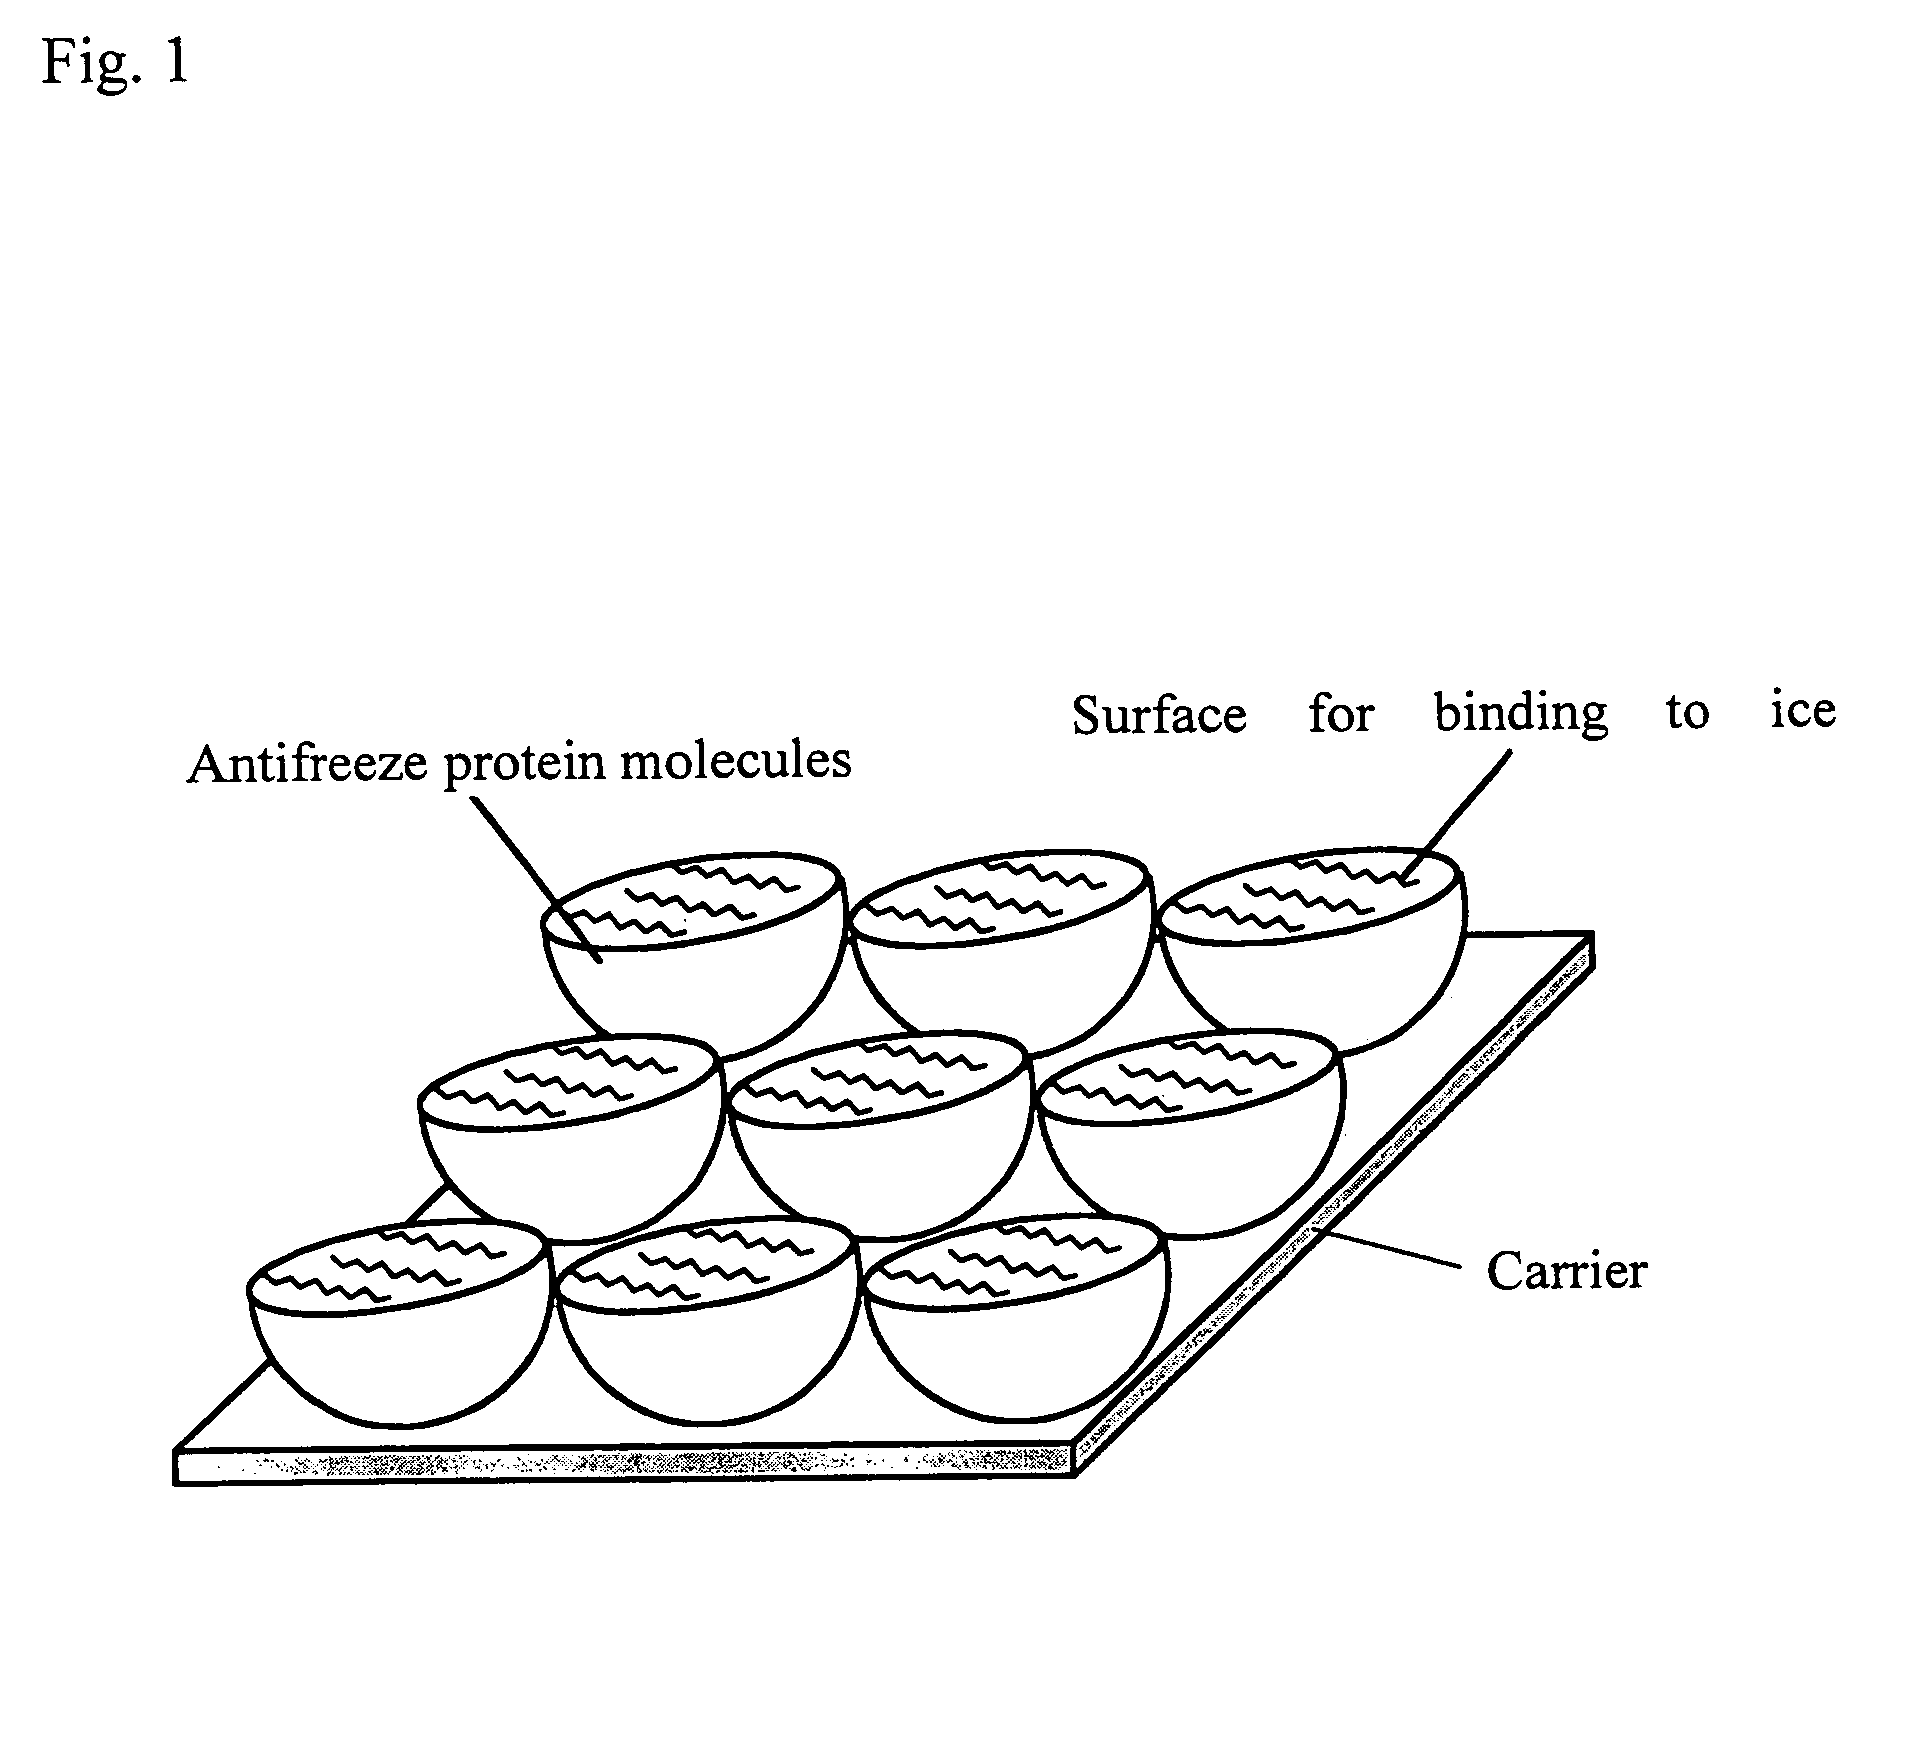 Material for promoting the freezing of water or hydrous substance